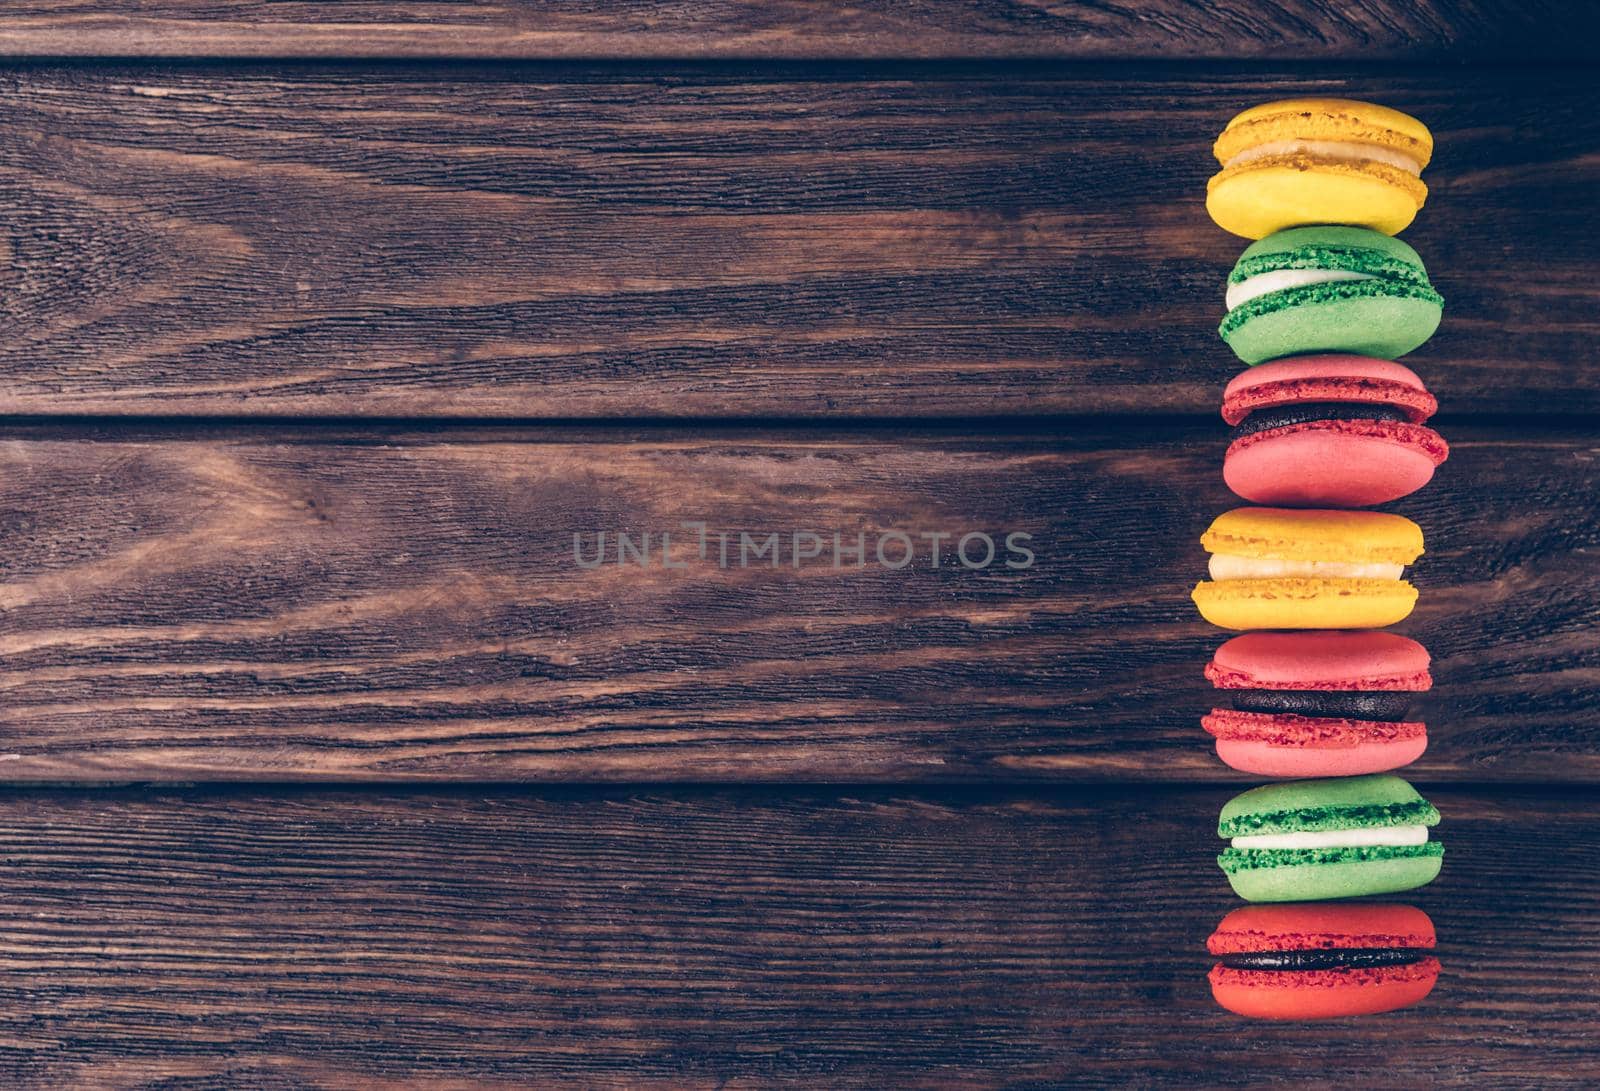 Row of colorful sweet macaroons on wooden background, copy-space in left part of image.